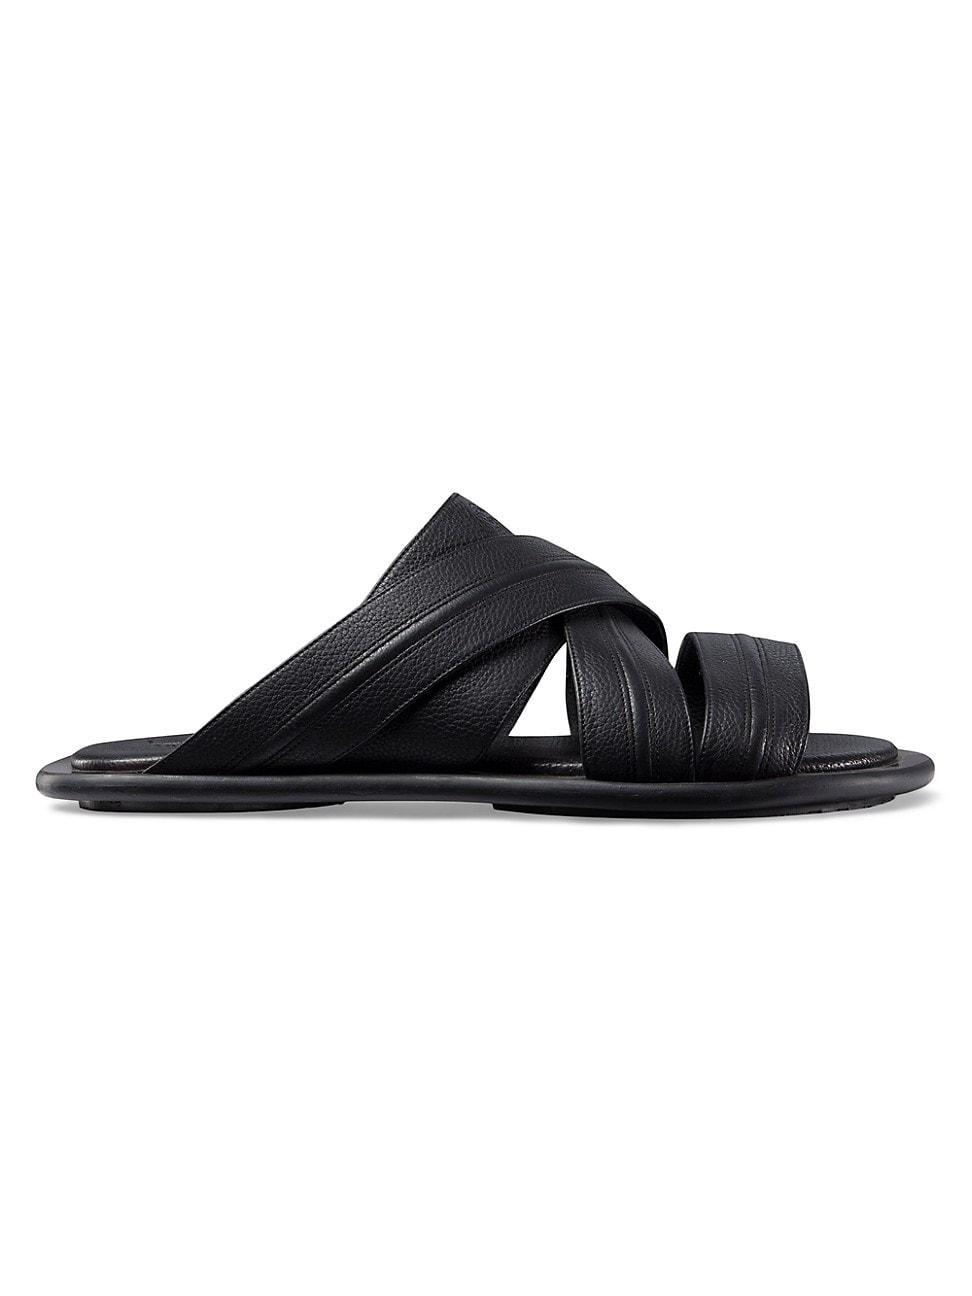 Mens Calfskin Leather Sandals Product Image